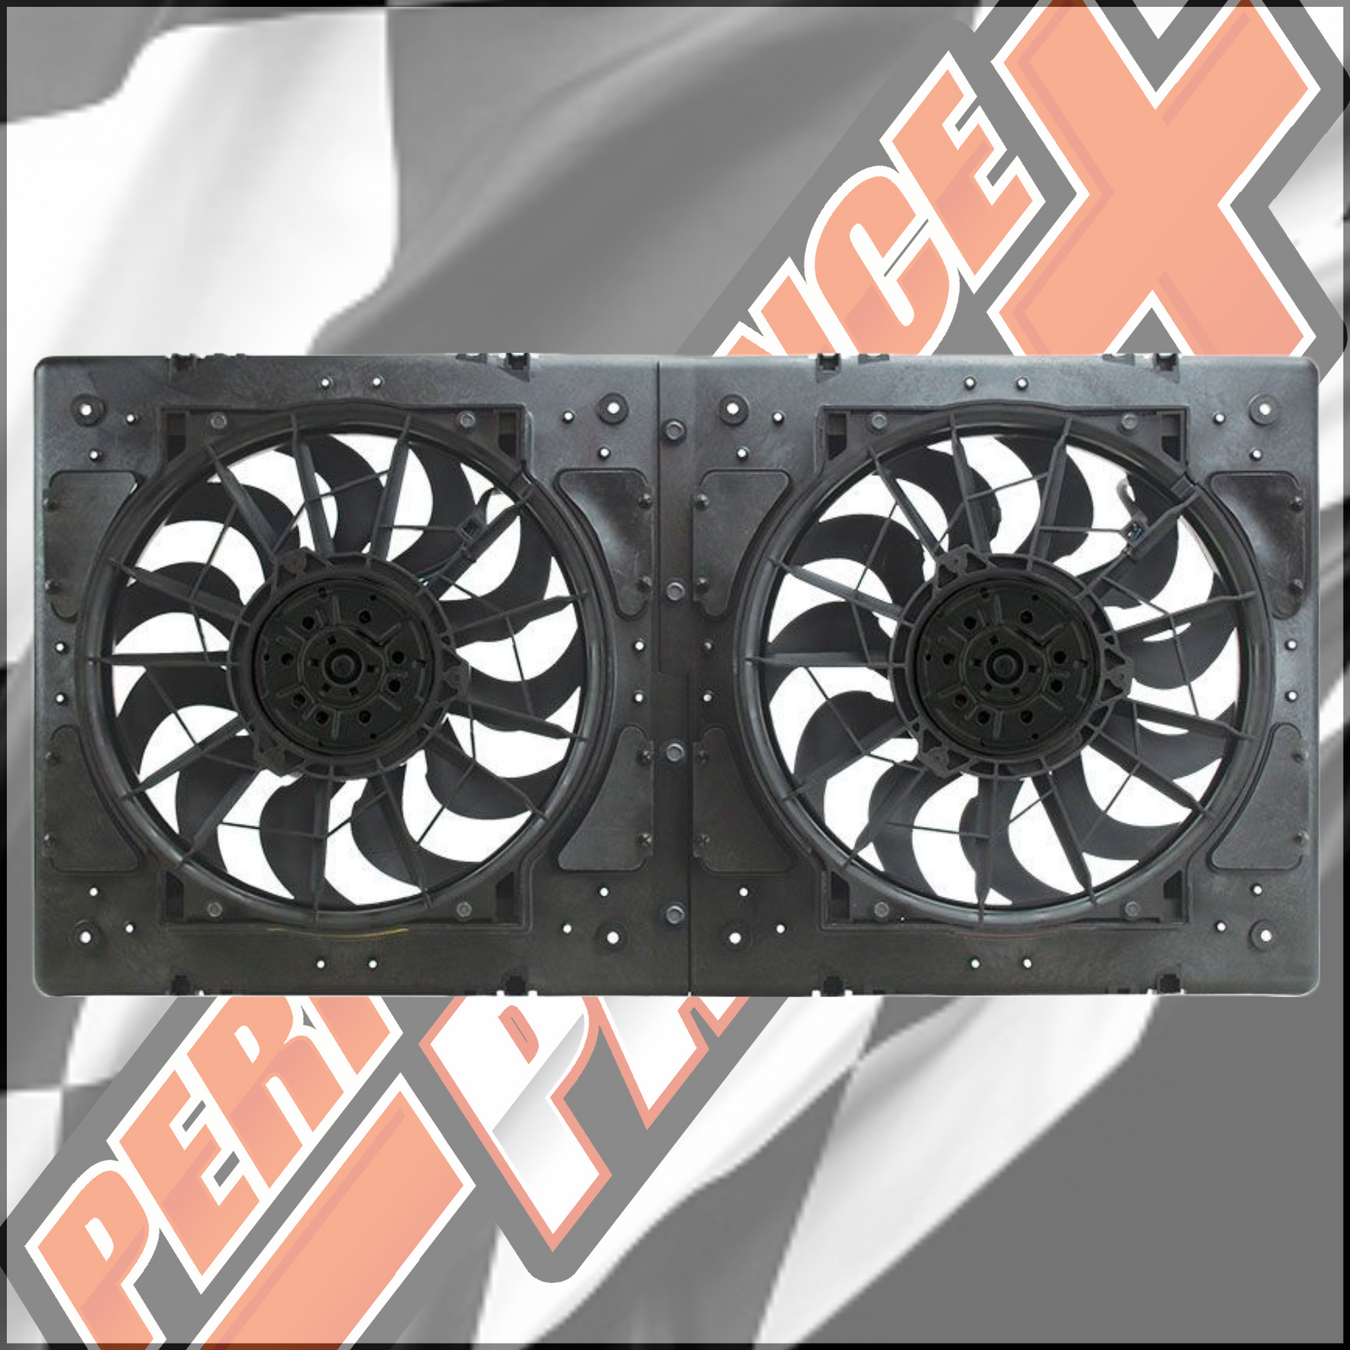 Electric Fans & Accessories